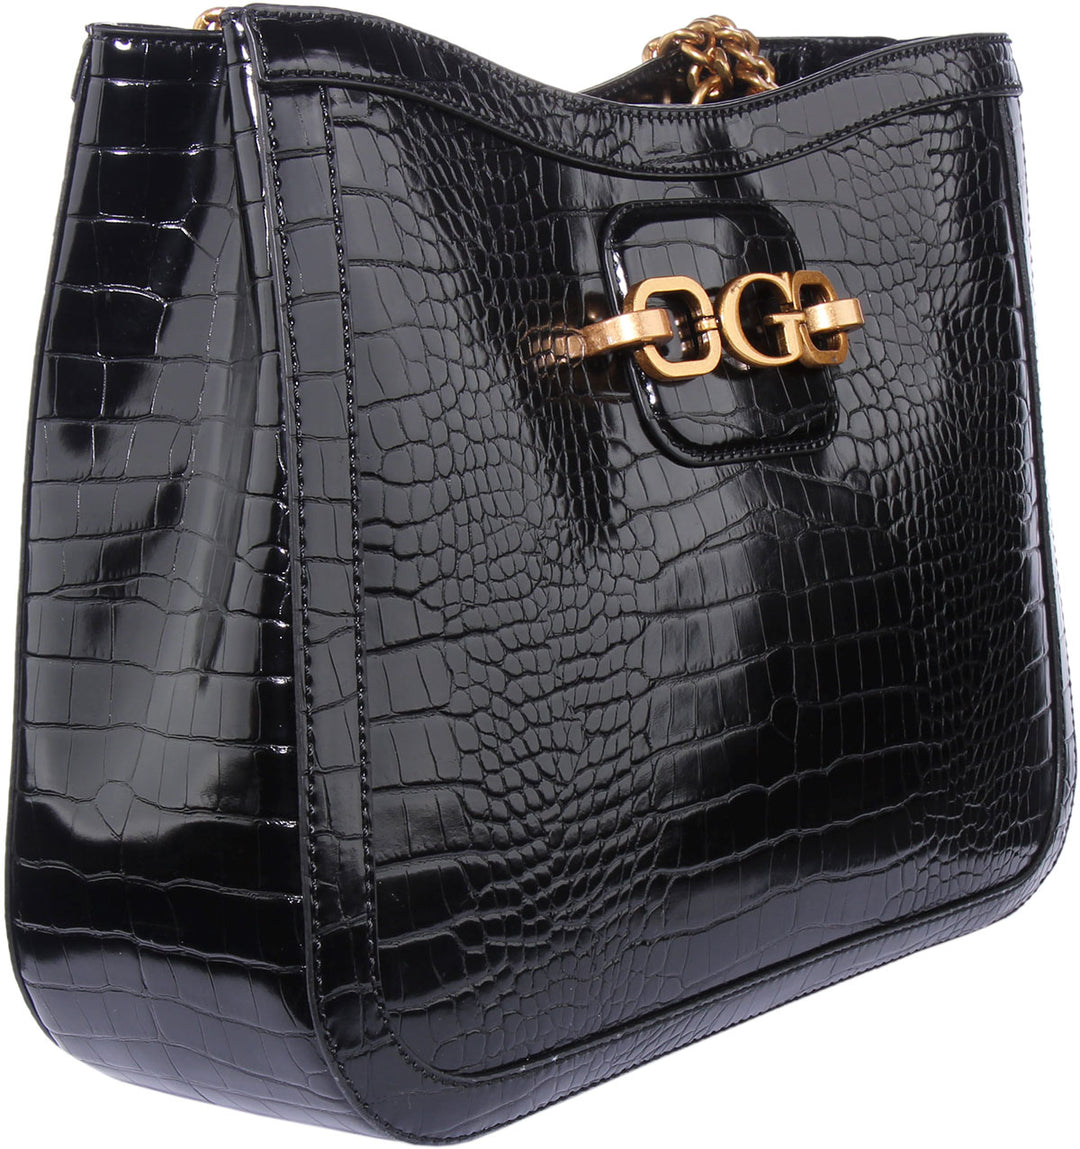 Guess, Bags, Guess Luxeunique Embossed Toteshoulder Bag